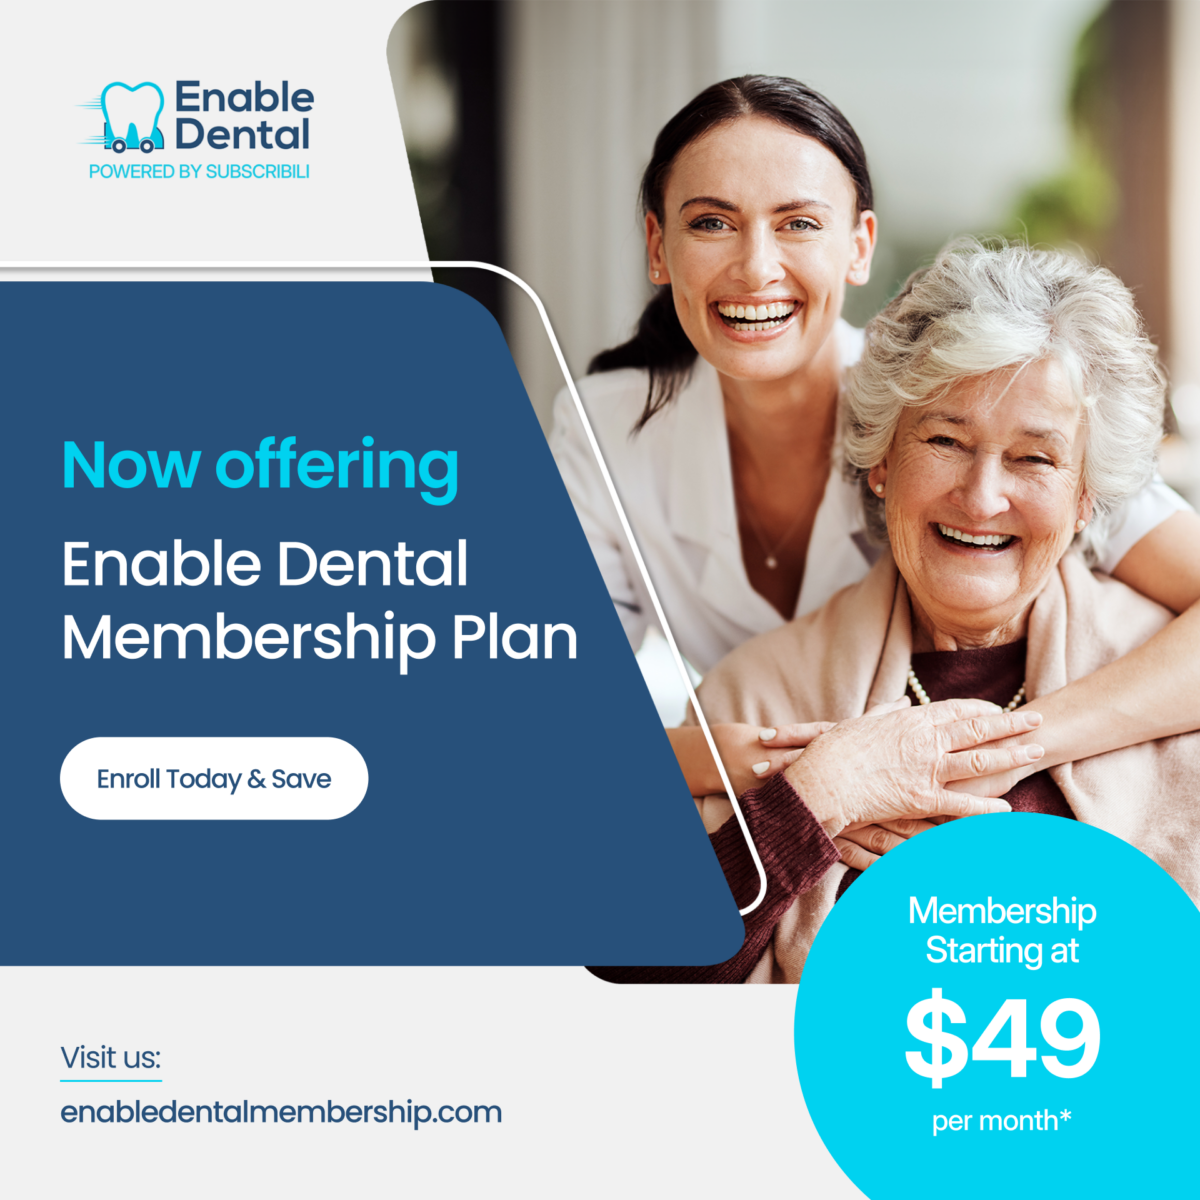 Exciting News from Enable Dental: Affordable Dental Care Through A Partnership with Subscribli